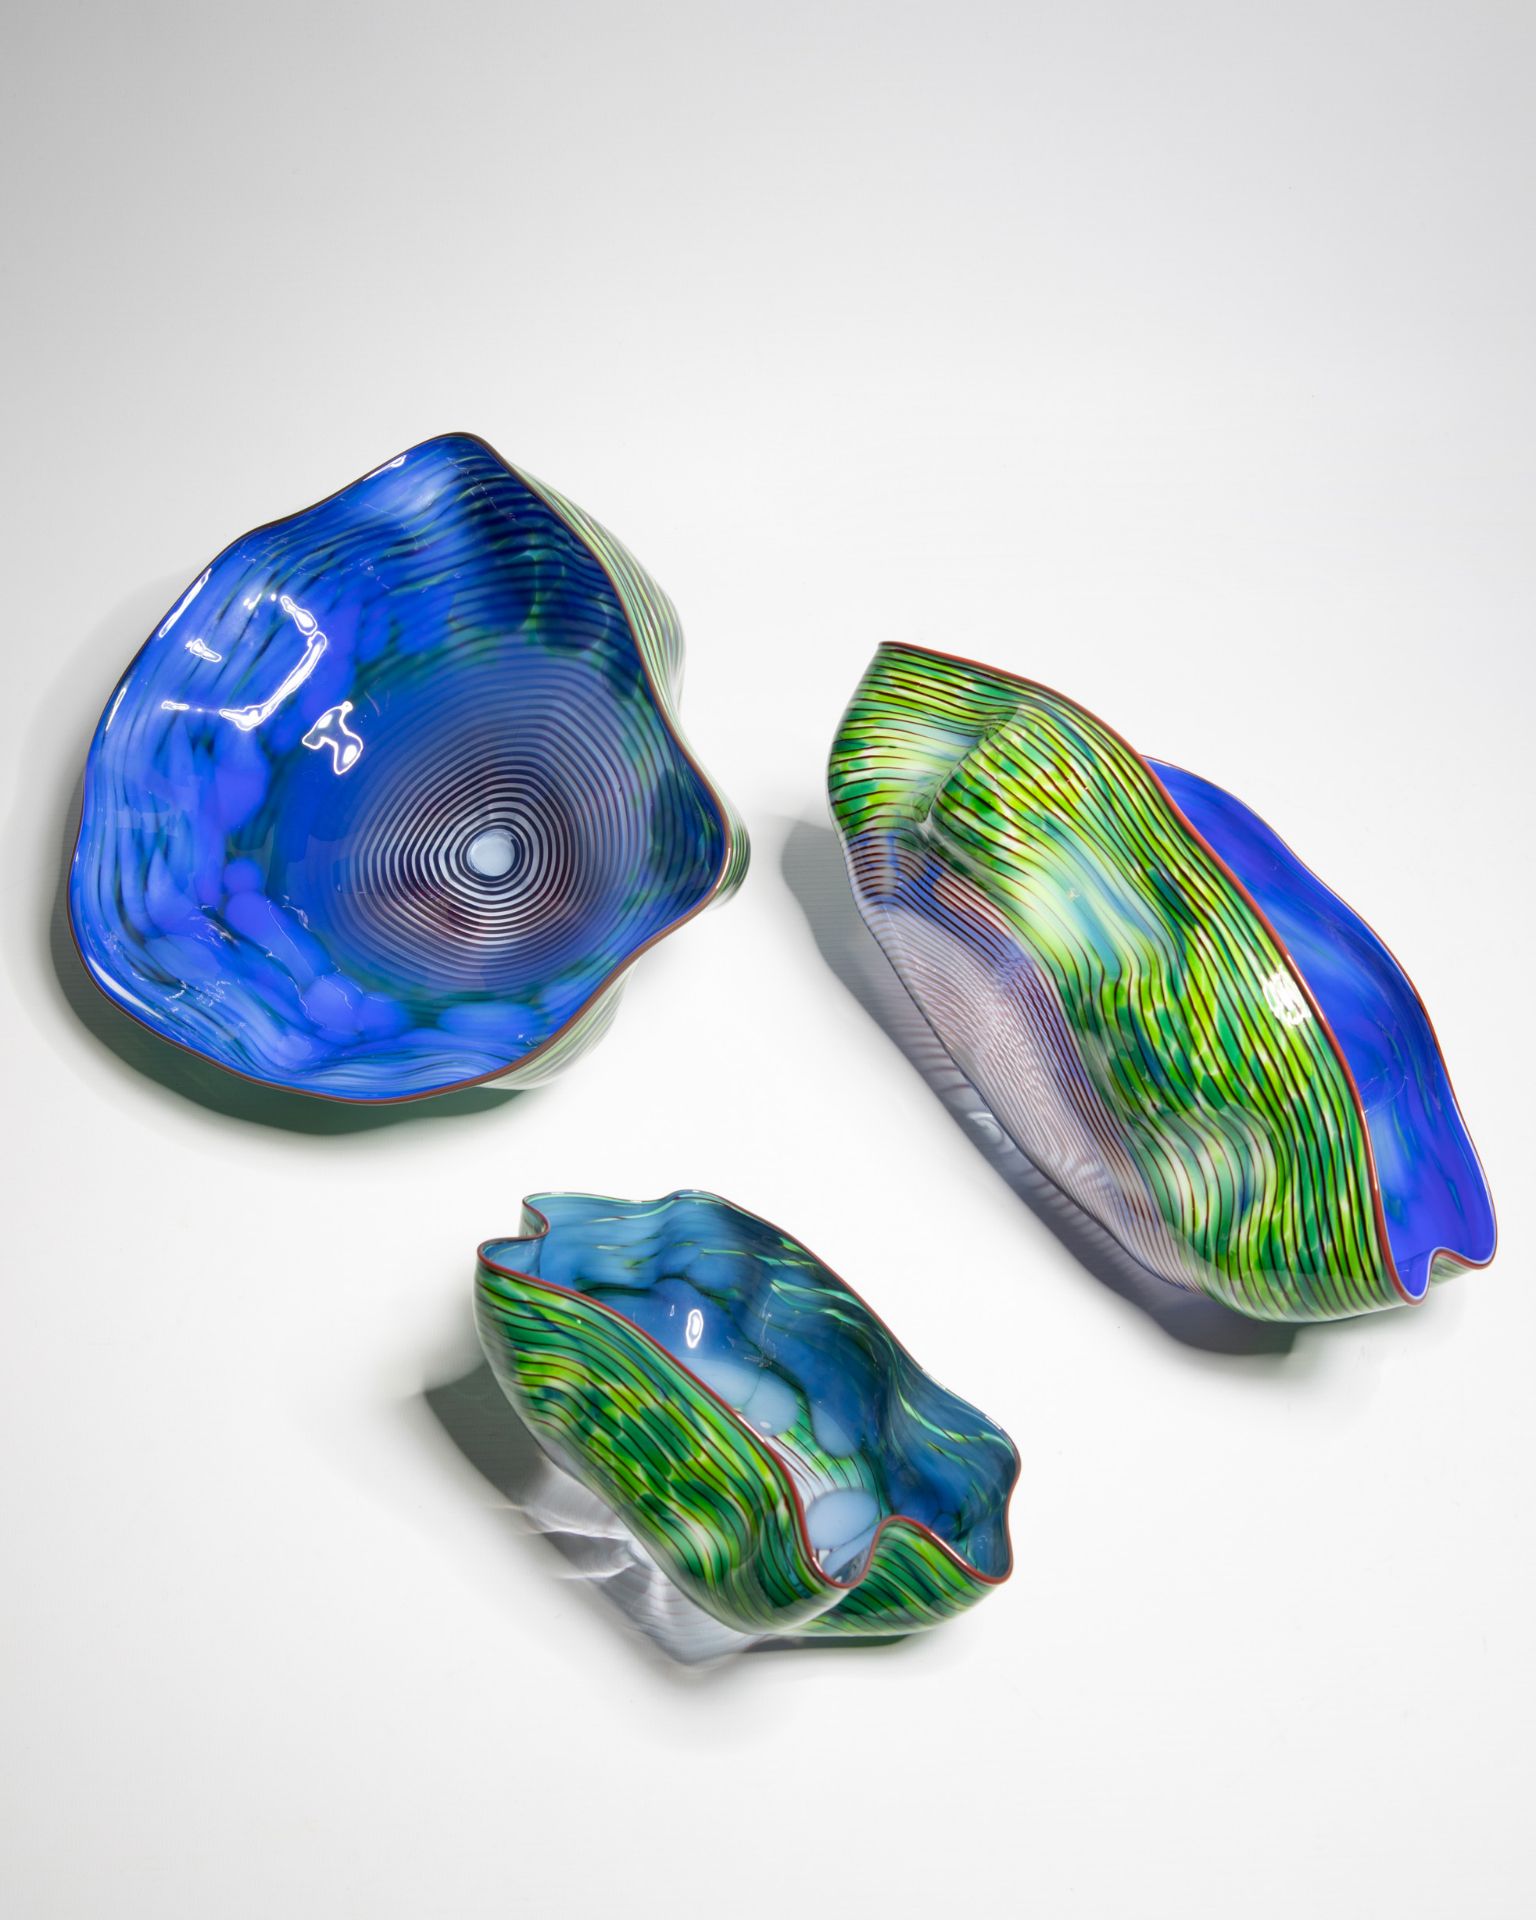 Dale Chihuly, 3 seaforms piece sculptural glasforms